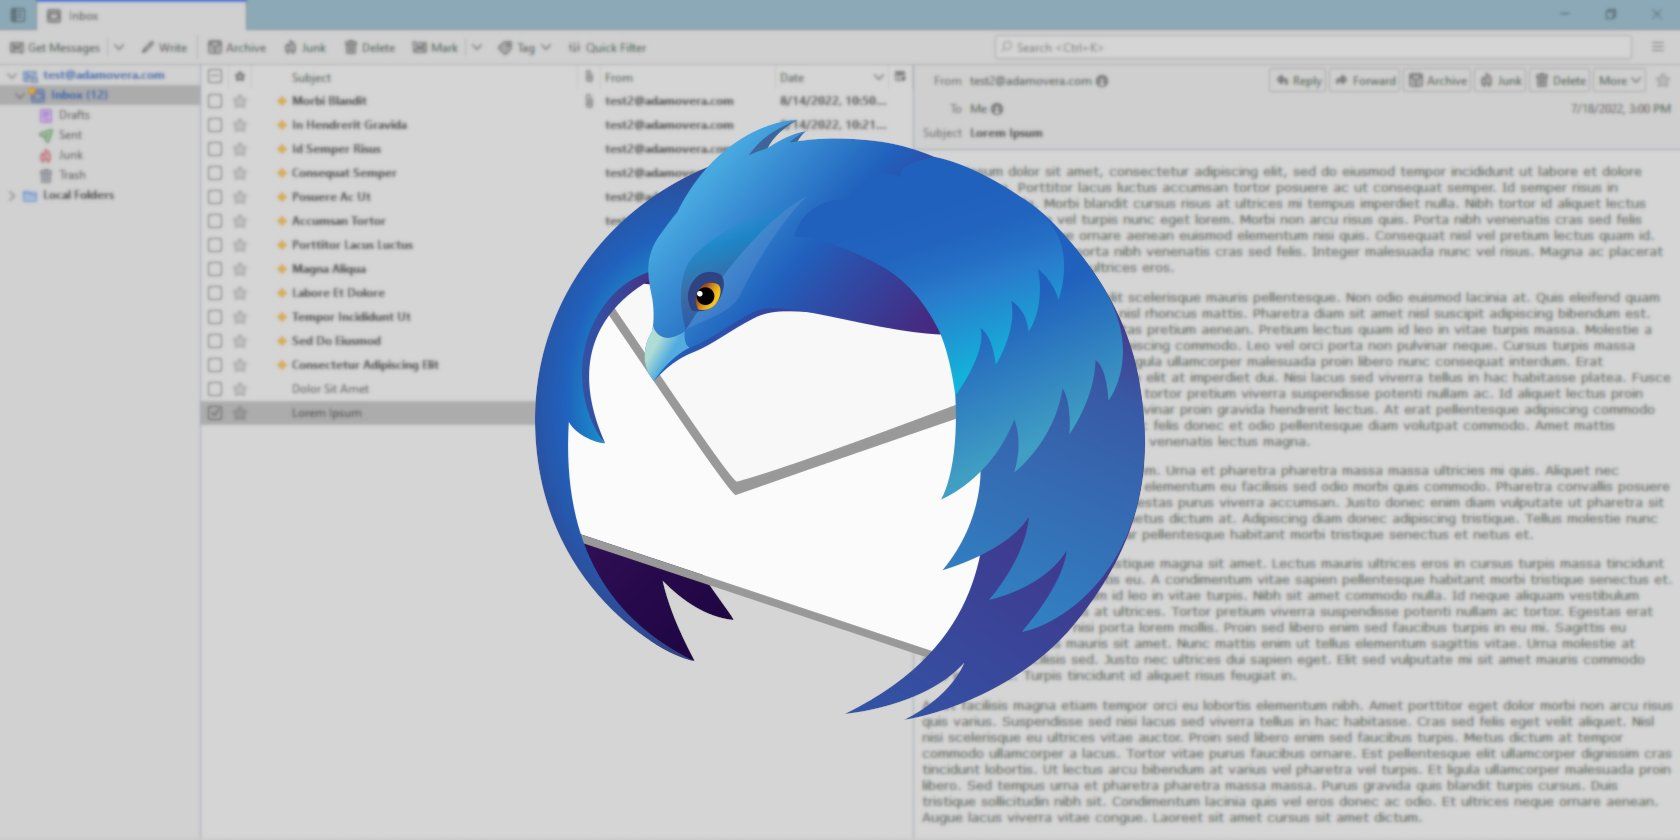 The Thunderbird logo with a darkened and blurred screenshot of the application in the background.